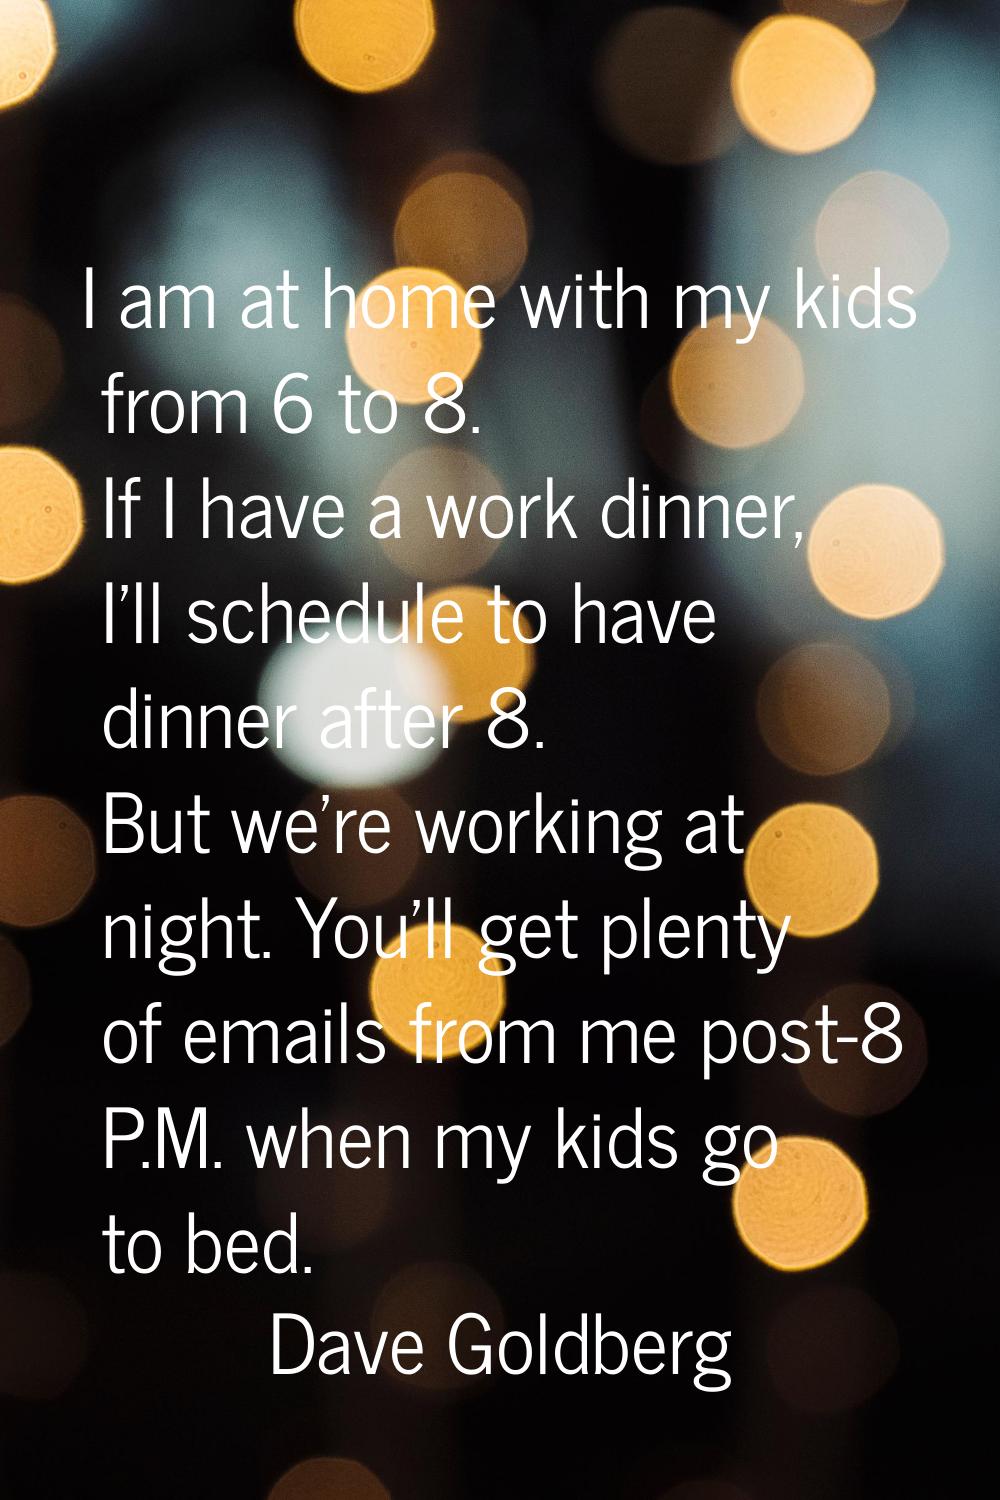 I am at home with my kids from 6 to 8. If I have a work dinner, I'll schedule to have dinner after 